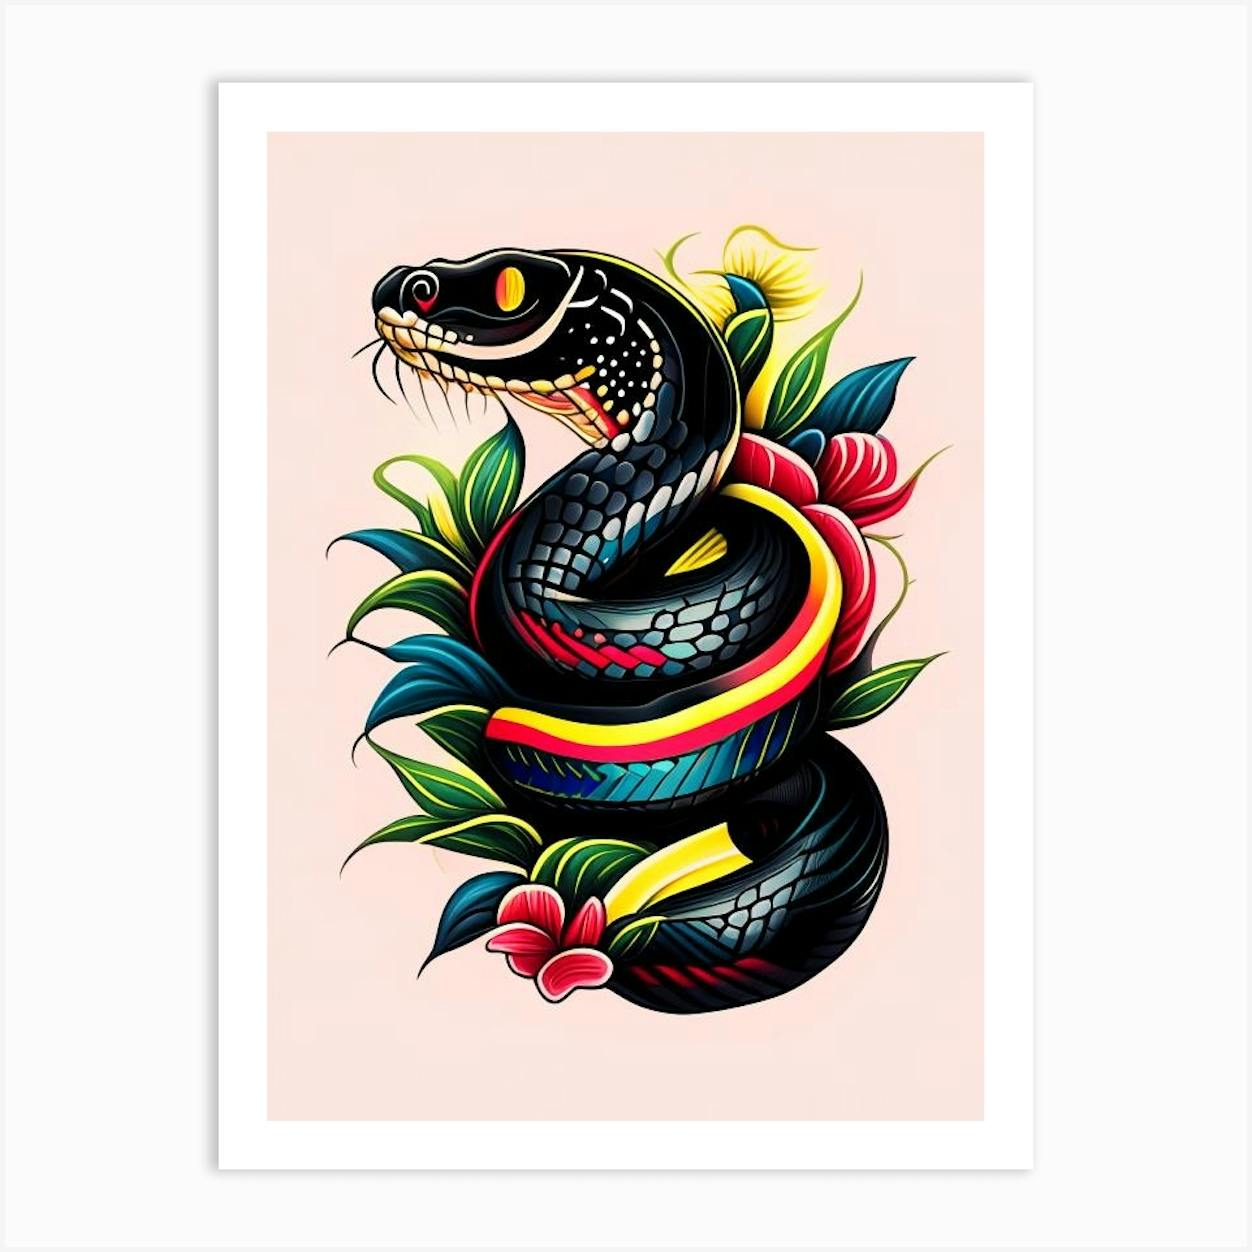 Let's See Those Unique Snake Tattoos! : r/snakes